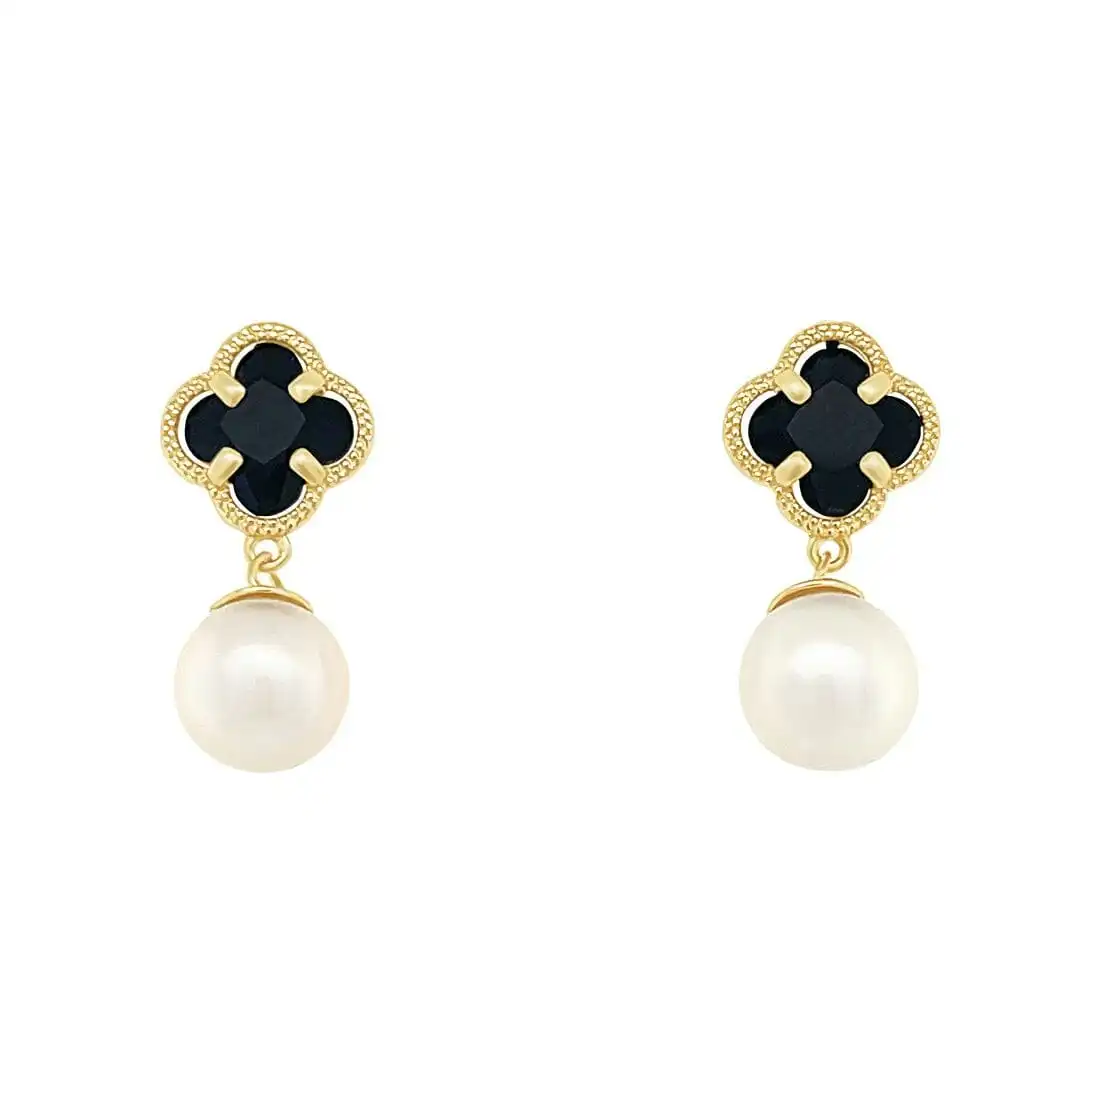 Black Clover and Pearl Stud Earrings in 9ct Yellow Gold Silver Infused